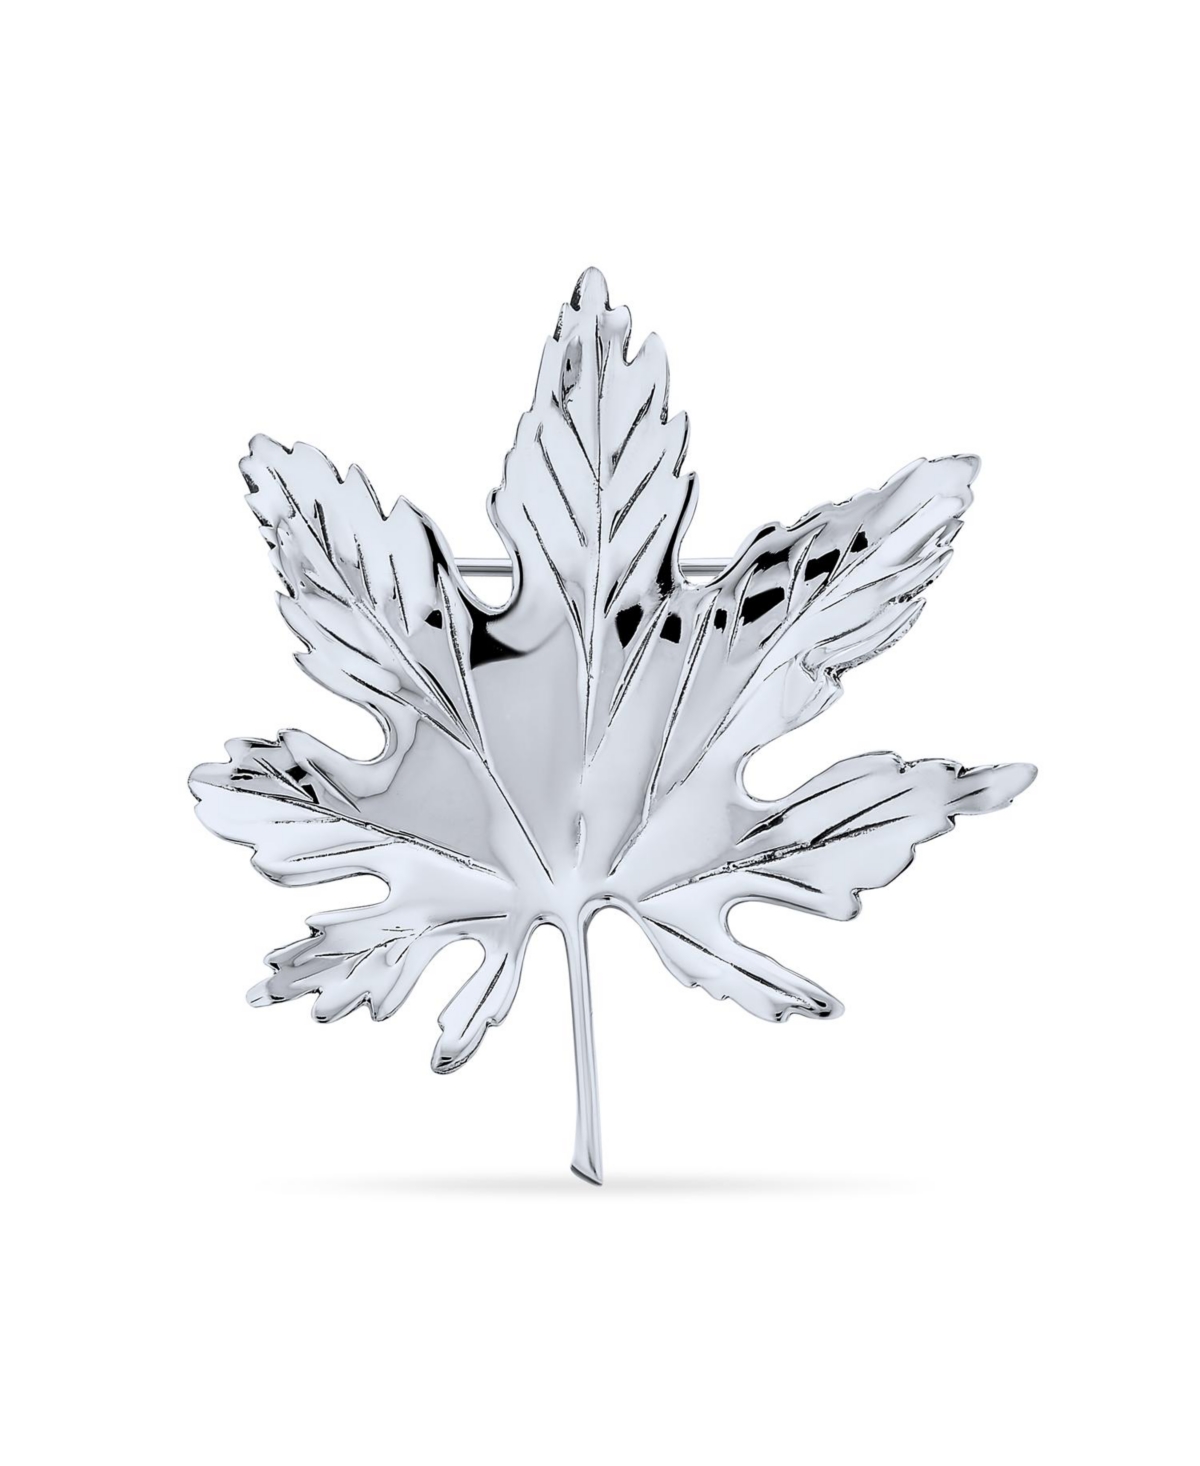 Large Canada National Symbol Maple Leaf Pin Brooch Maple Tree Western Jewelry For Women Accessory .925 Sterling Silver Polished - Silver